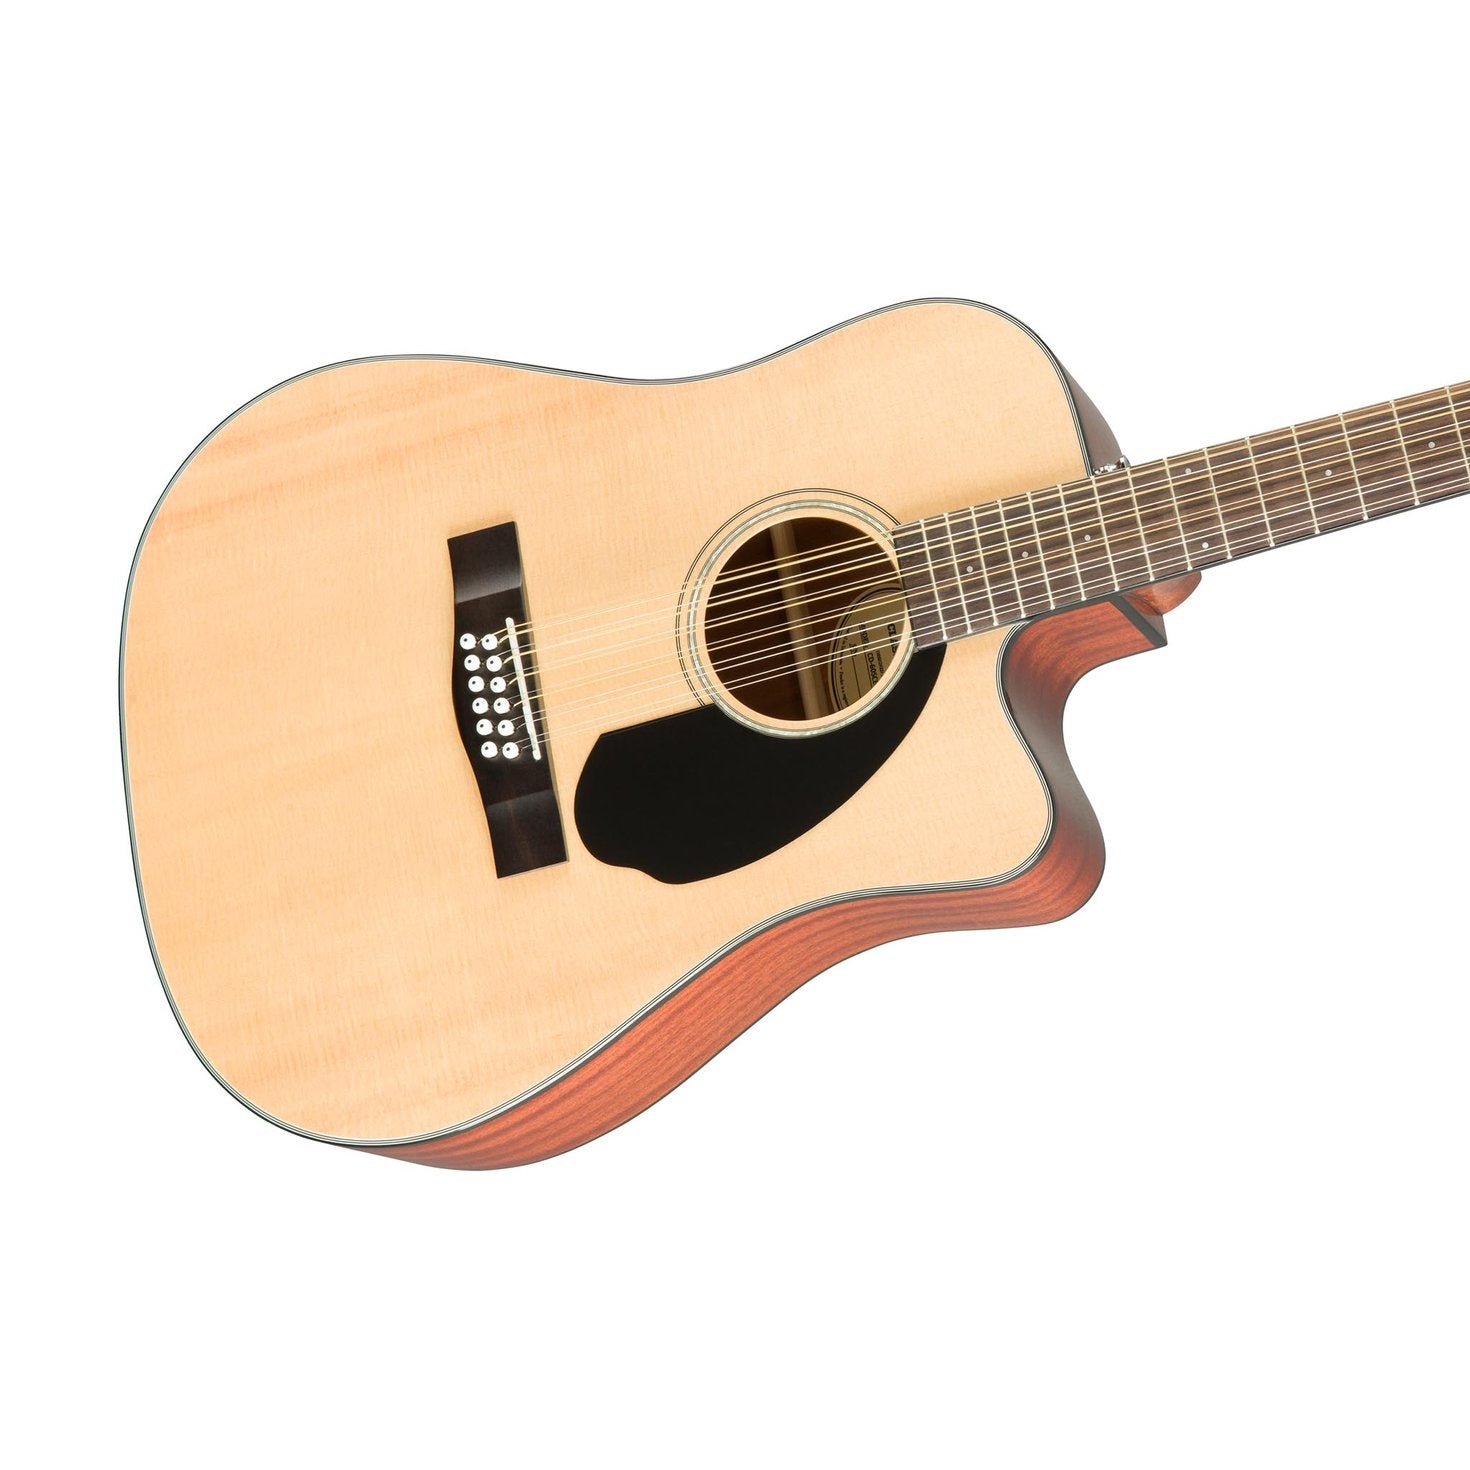 Fender CD-60SCE Dreadnought 12-string Acoustic Guitar, Walnut FB, Natural, FENDER, ACOUSTIC GUITAR, fender-acoustic-guitar-f03-097-0193-021, ZOSO MUSIC SDN BHD